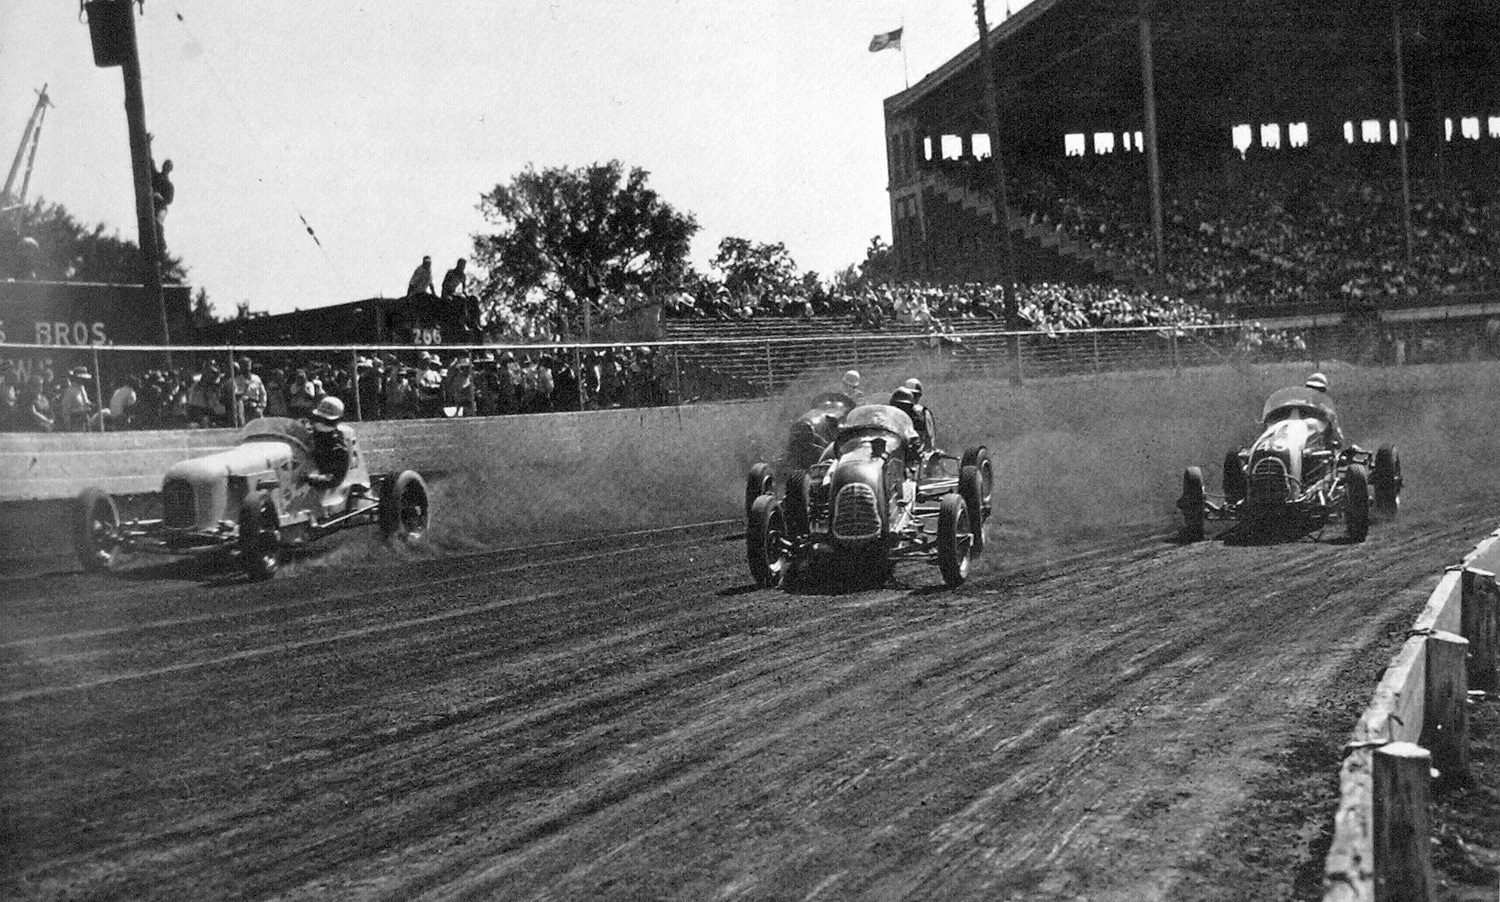 Drivers compete at the Iowa State Fairgrounds’ old racetrack. Photo courtesy of Bill Haglund